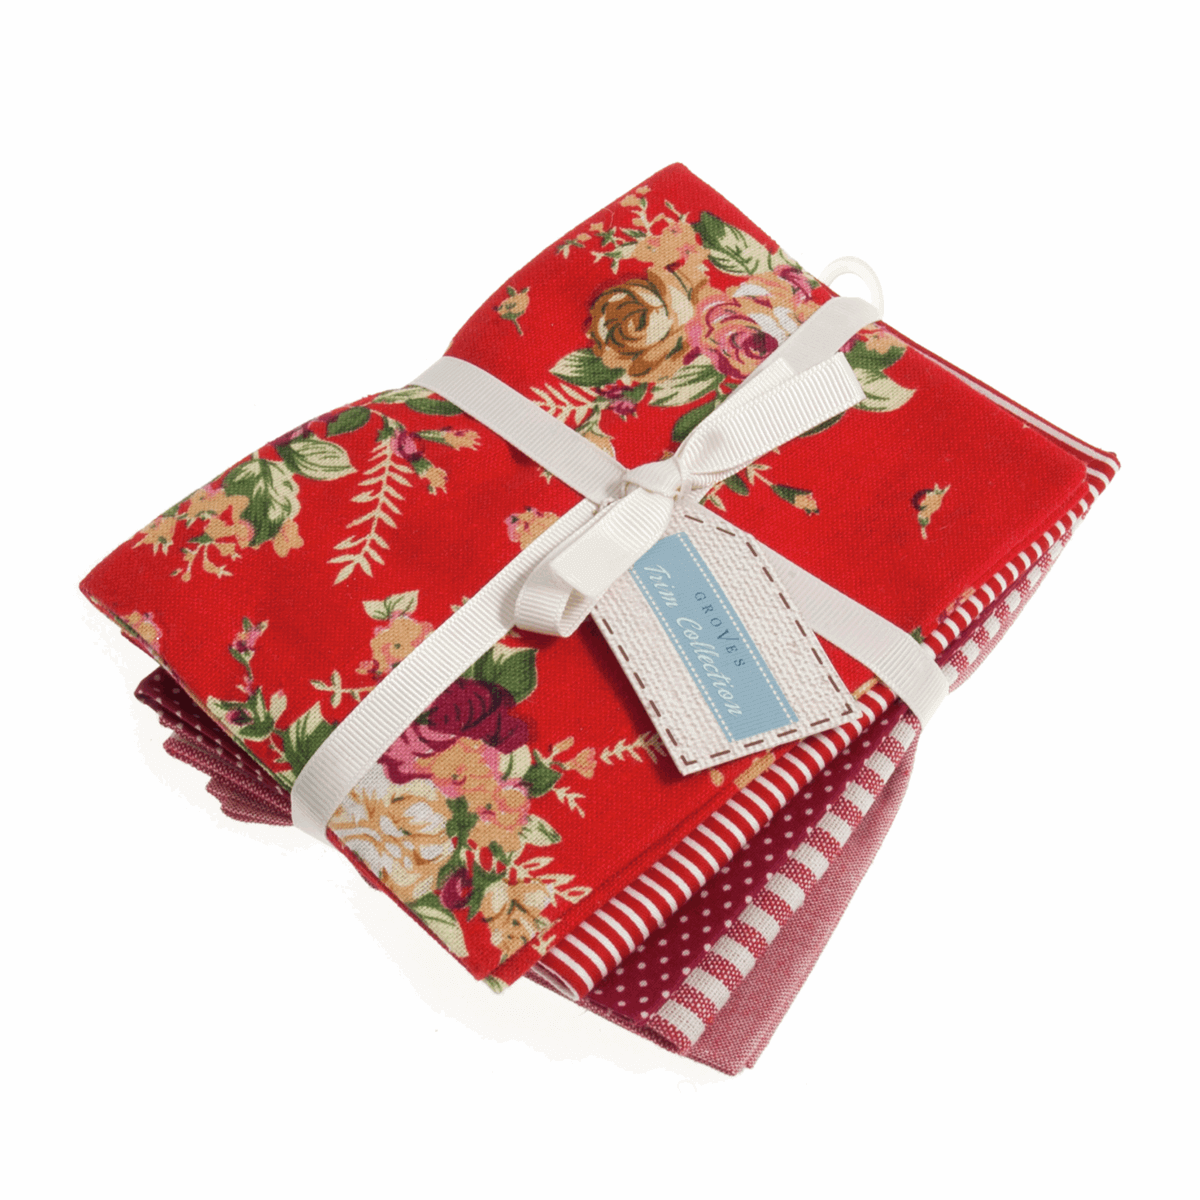 Cotton Polyester Ruby Red Stripe, Polkadot and Floral Fabrics Fat Quarter Bundle 5 Pack.